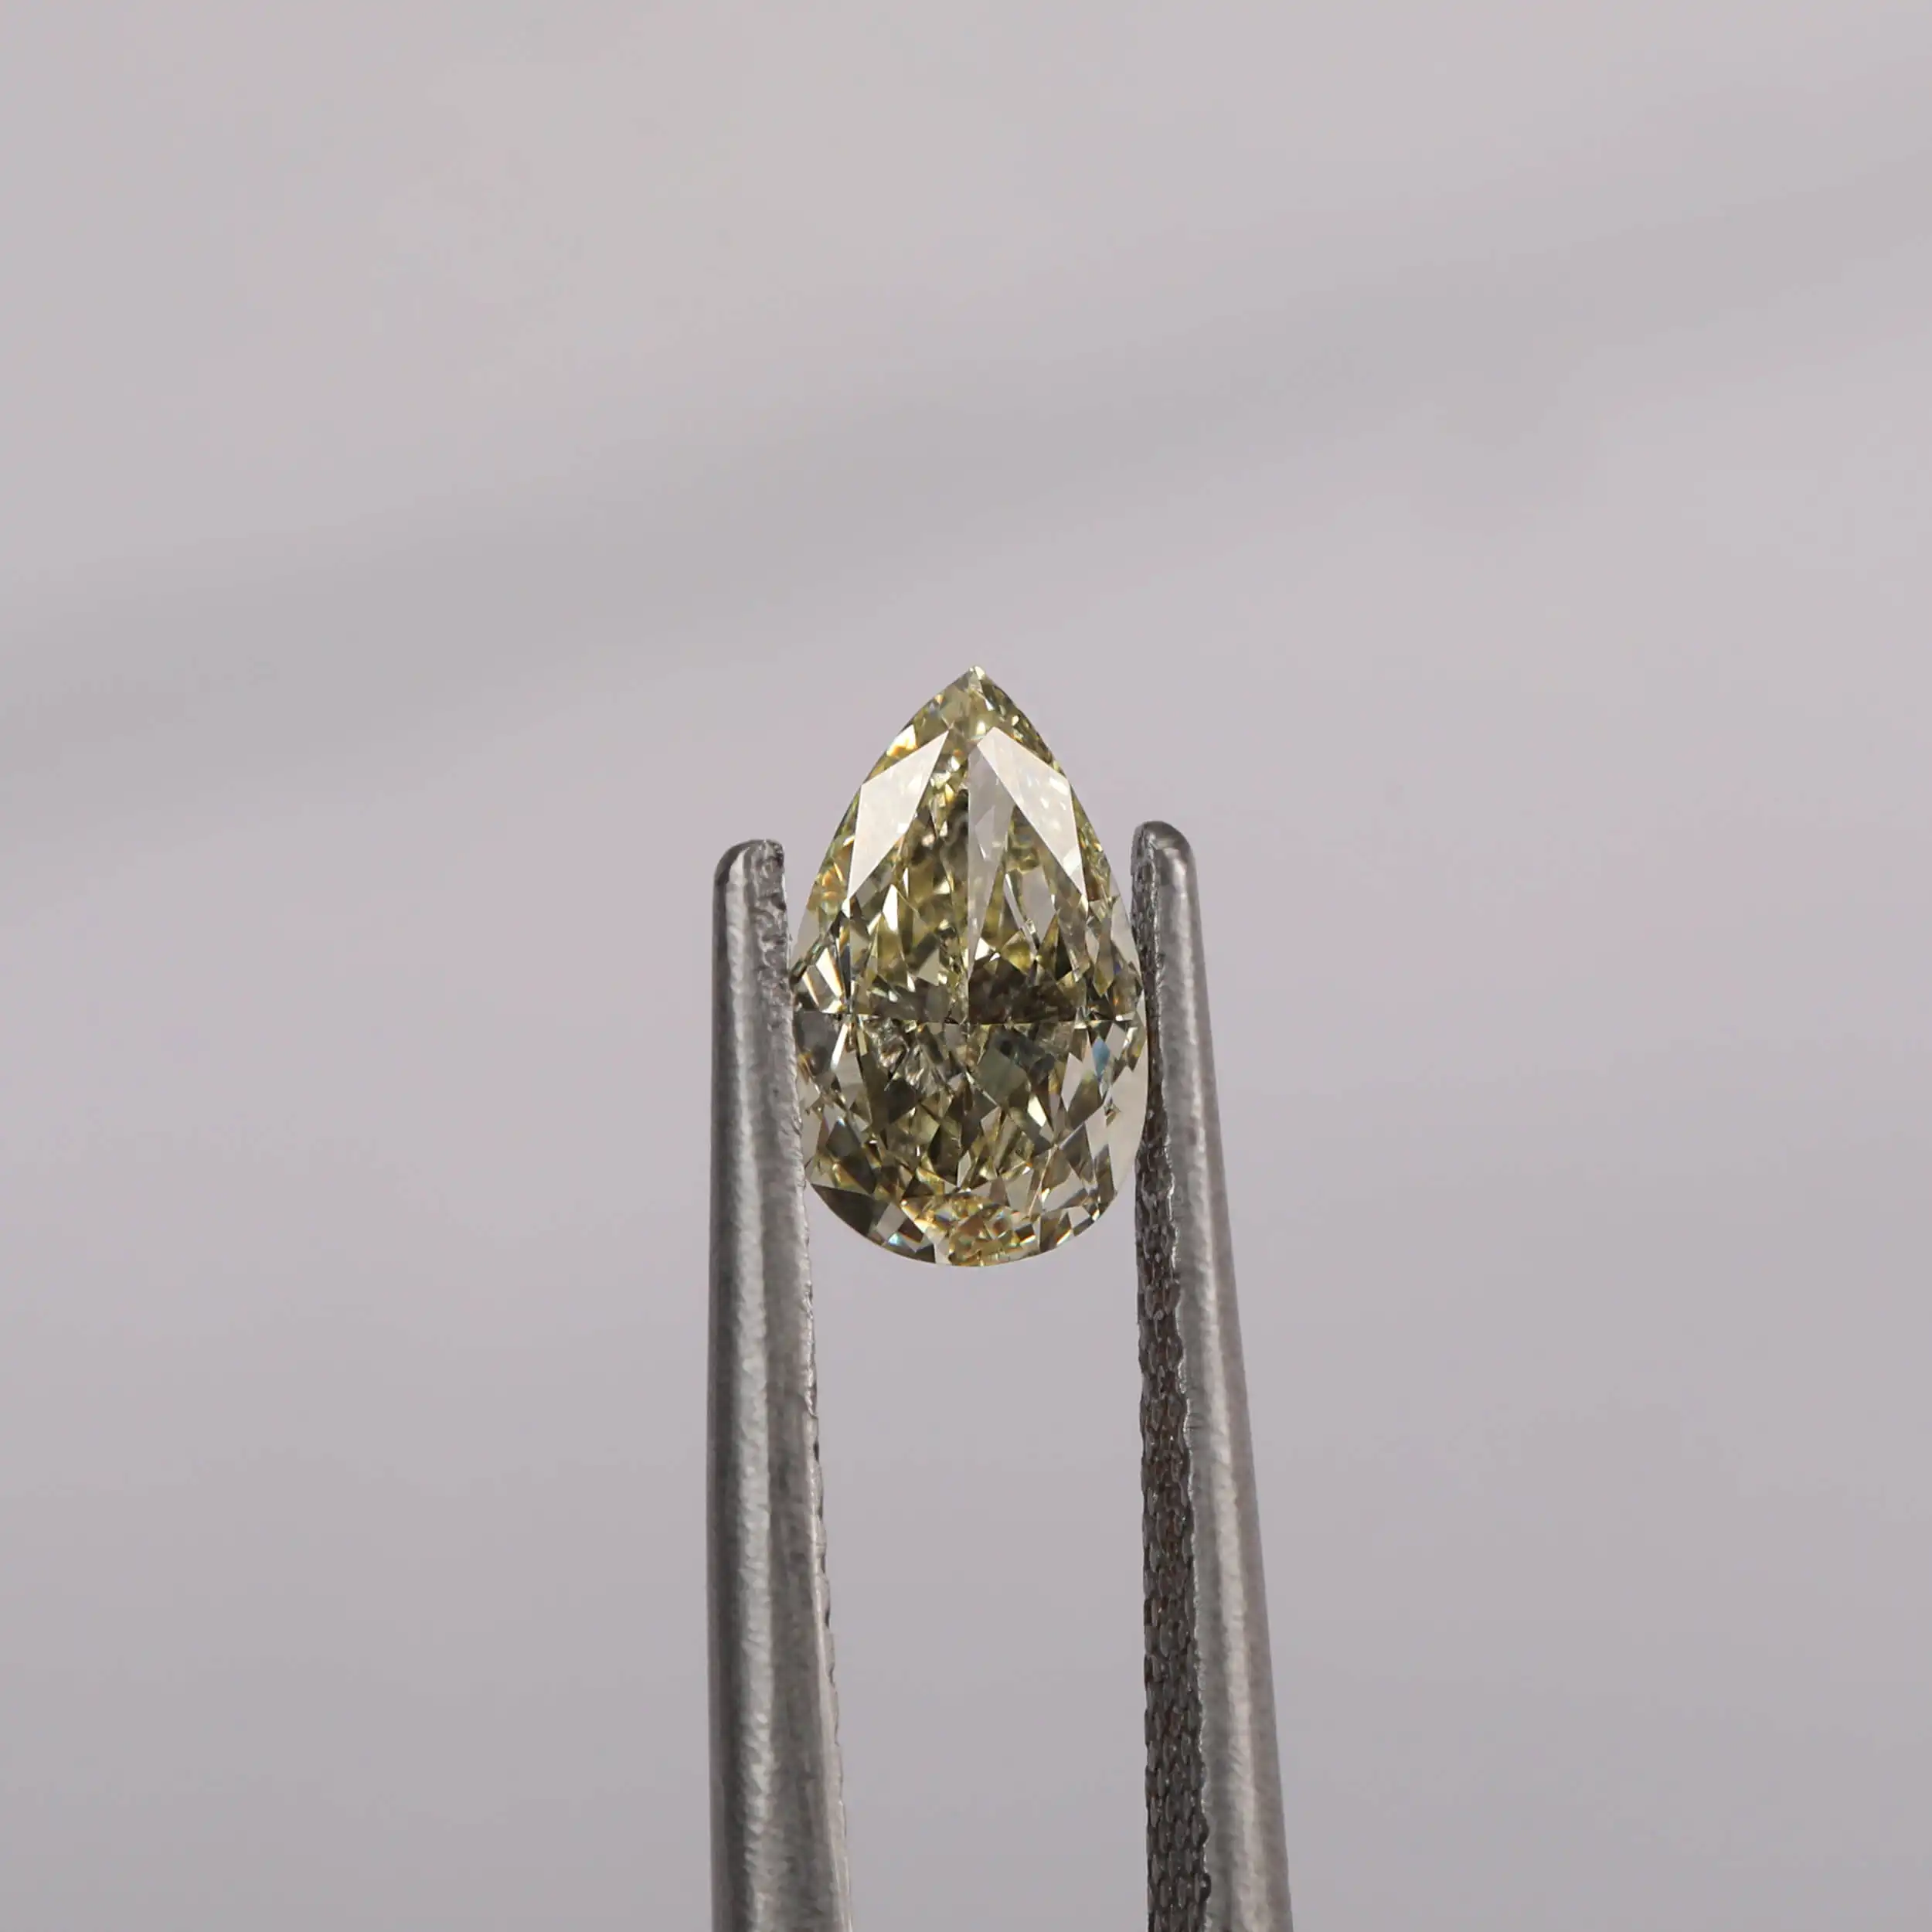 3.00 Carat PEAR Cut Lab Grown Diamond / FANCY YELLOW COLOUR FILLED LAB CREATED Diamond Loose Stone For Exquisite Jewelry Making